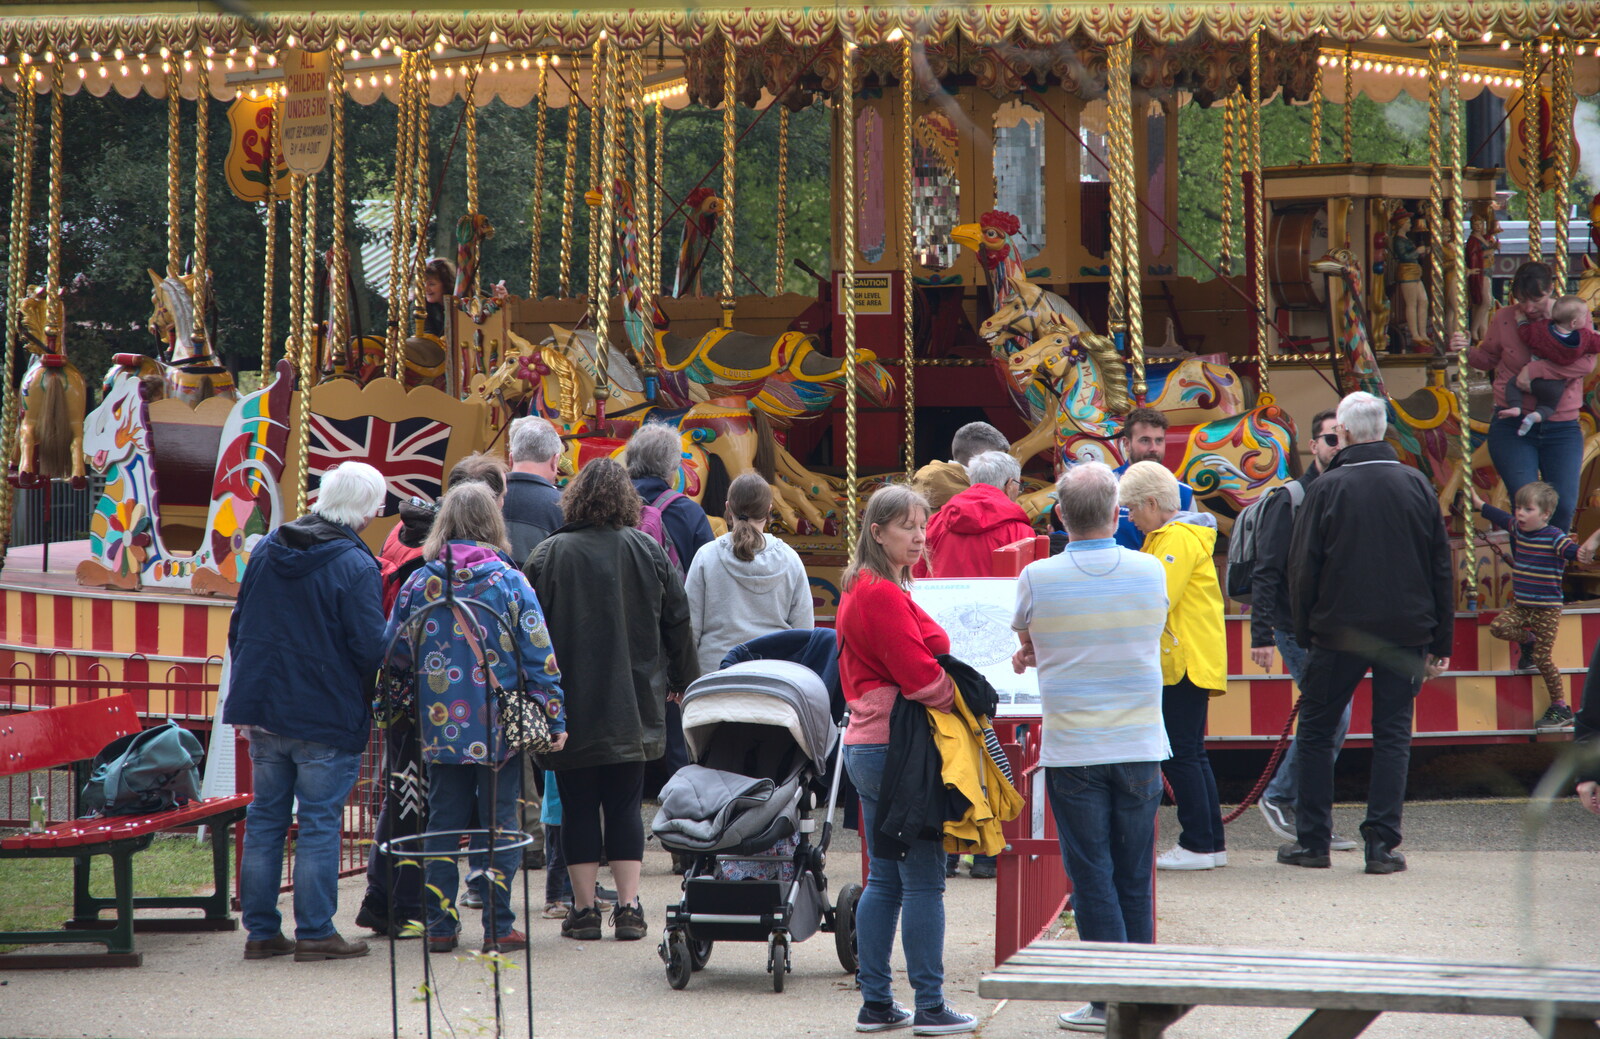 There's a queue for the gallopers from The Heritage Steam Gala, Bressingham Steam Museum, Norfolk - 1st May 2023